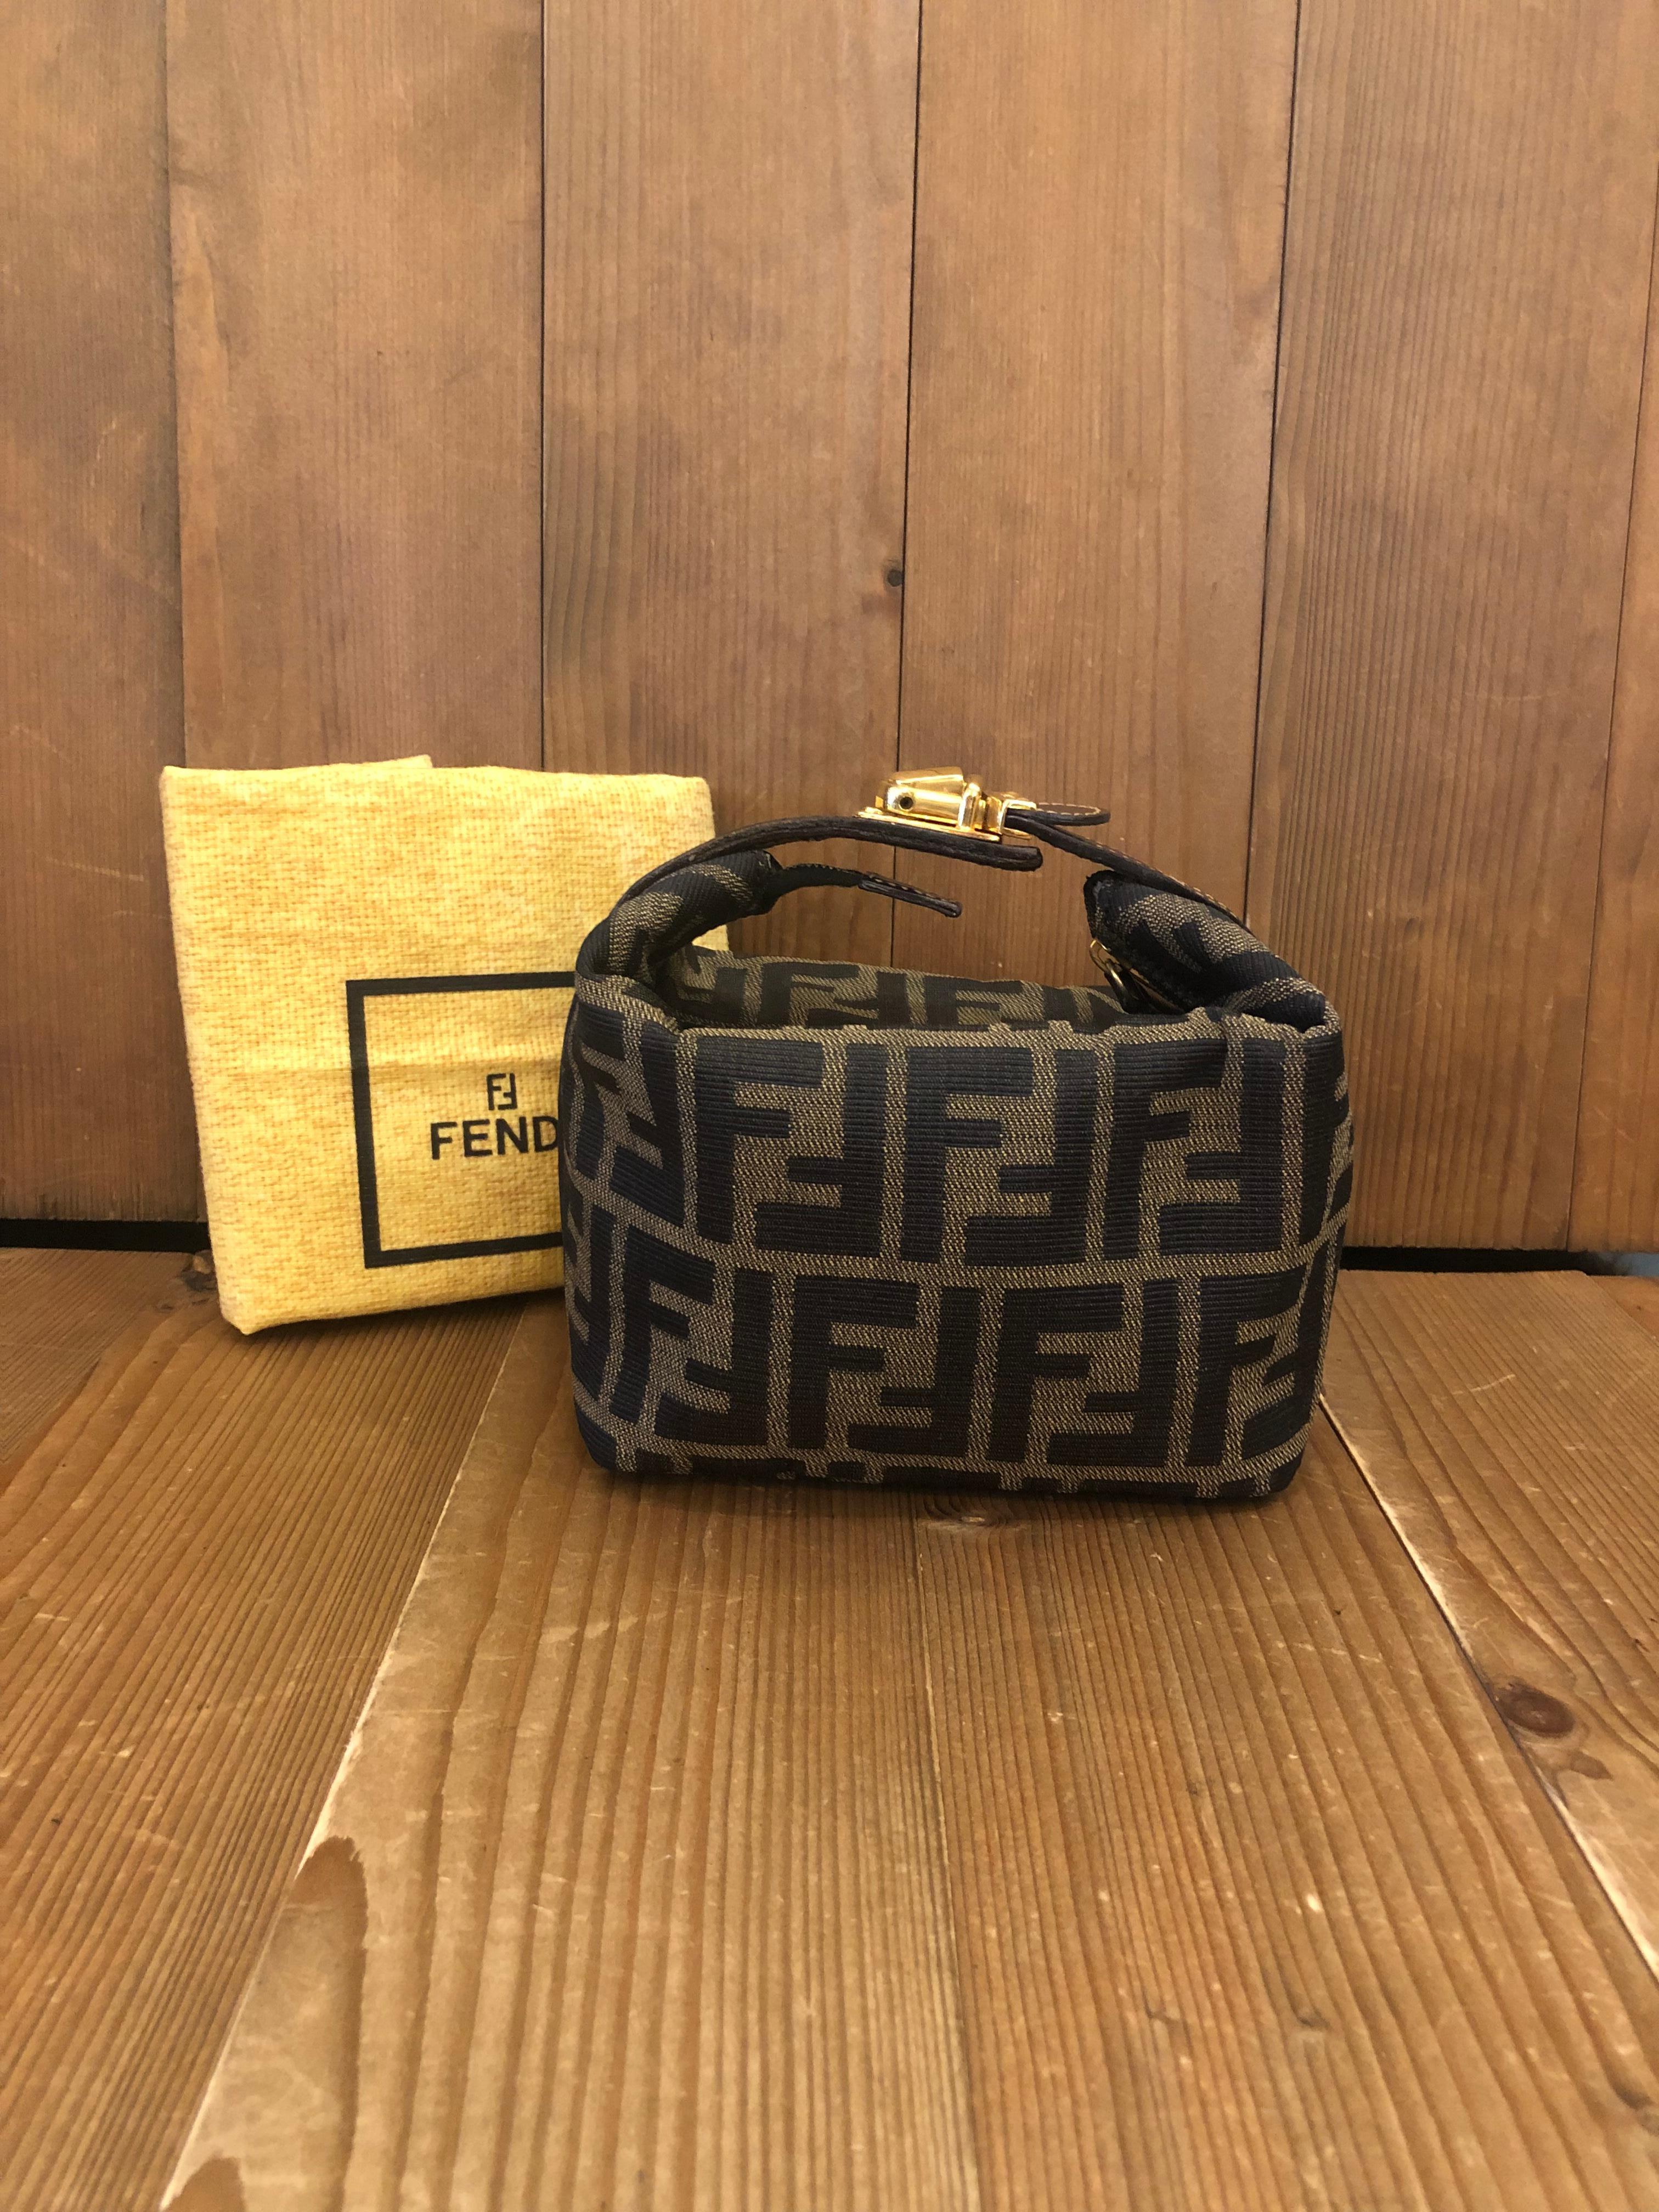 Vintage Fendi mini vanity pouch in Fendi's iconic Zucca jacquard featuring gold toned buckled handle. Made in Italy. Measures 6 x 5 x 3.75 inches (fits plus-sized iPhone)

Condition: Minor signs of wear. Interior fully re-lined

Outside: Minimal